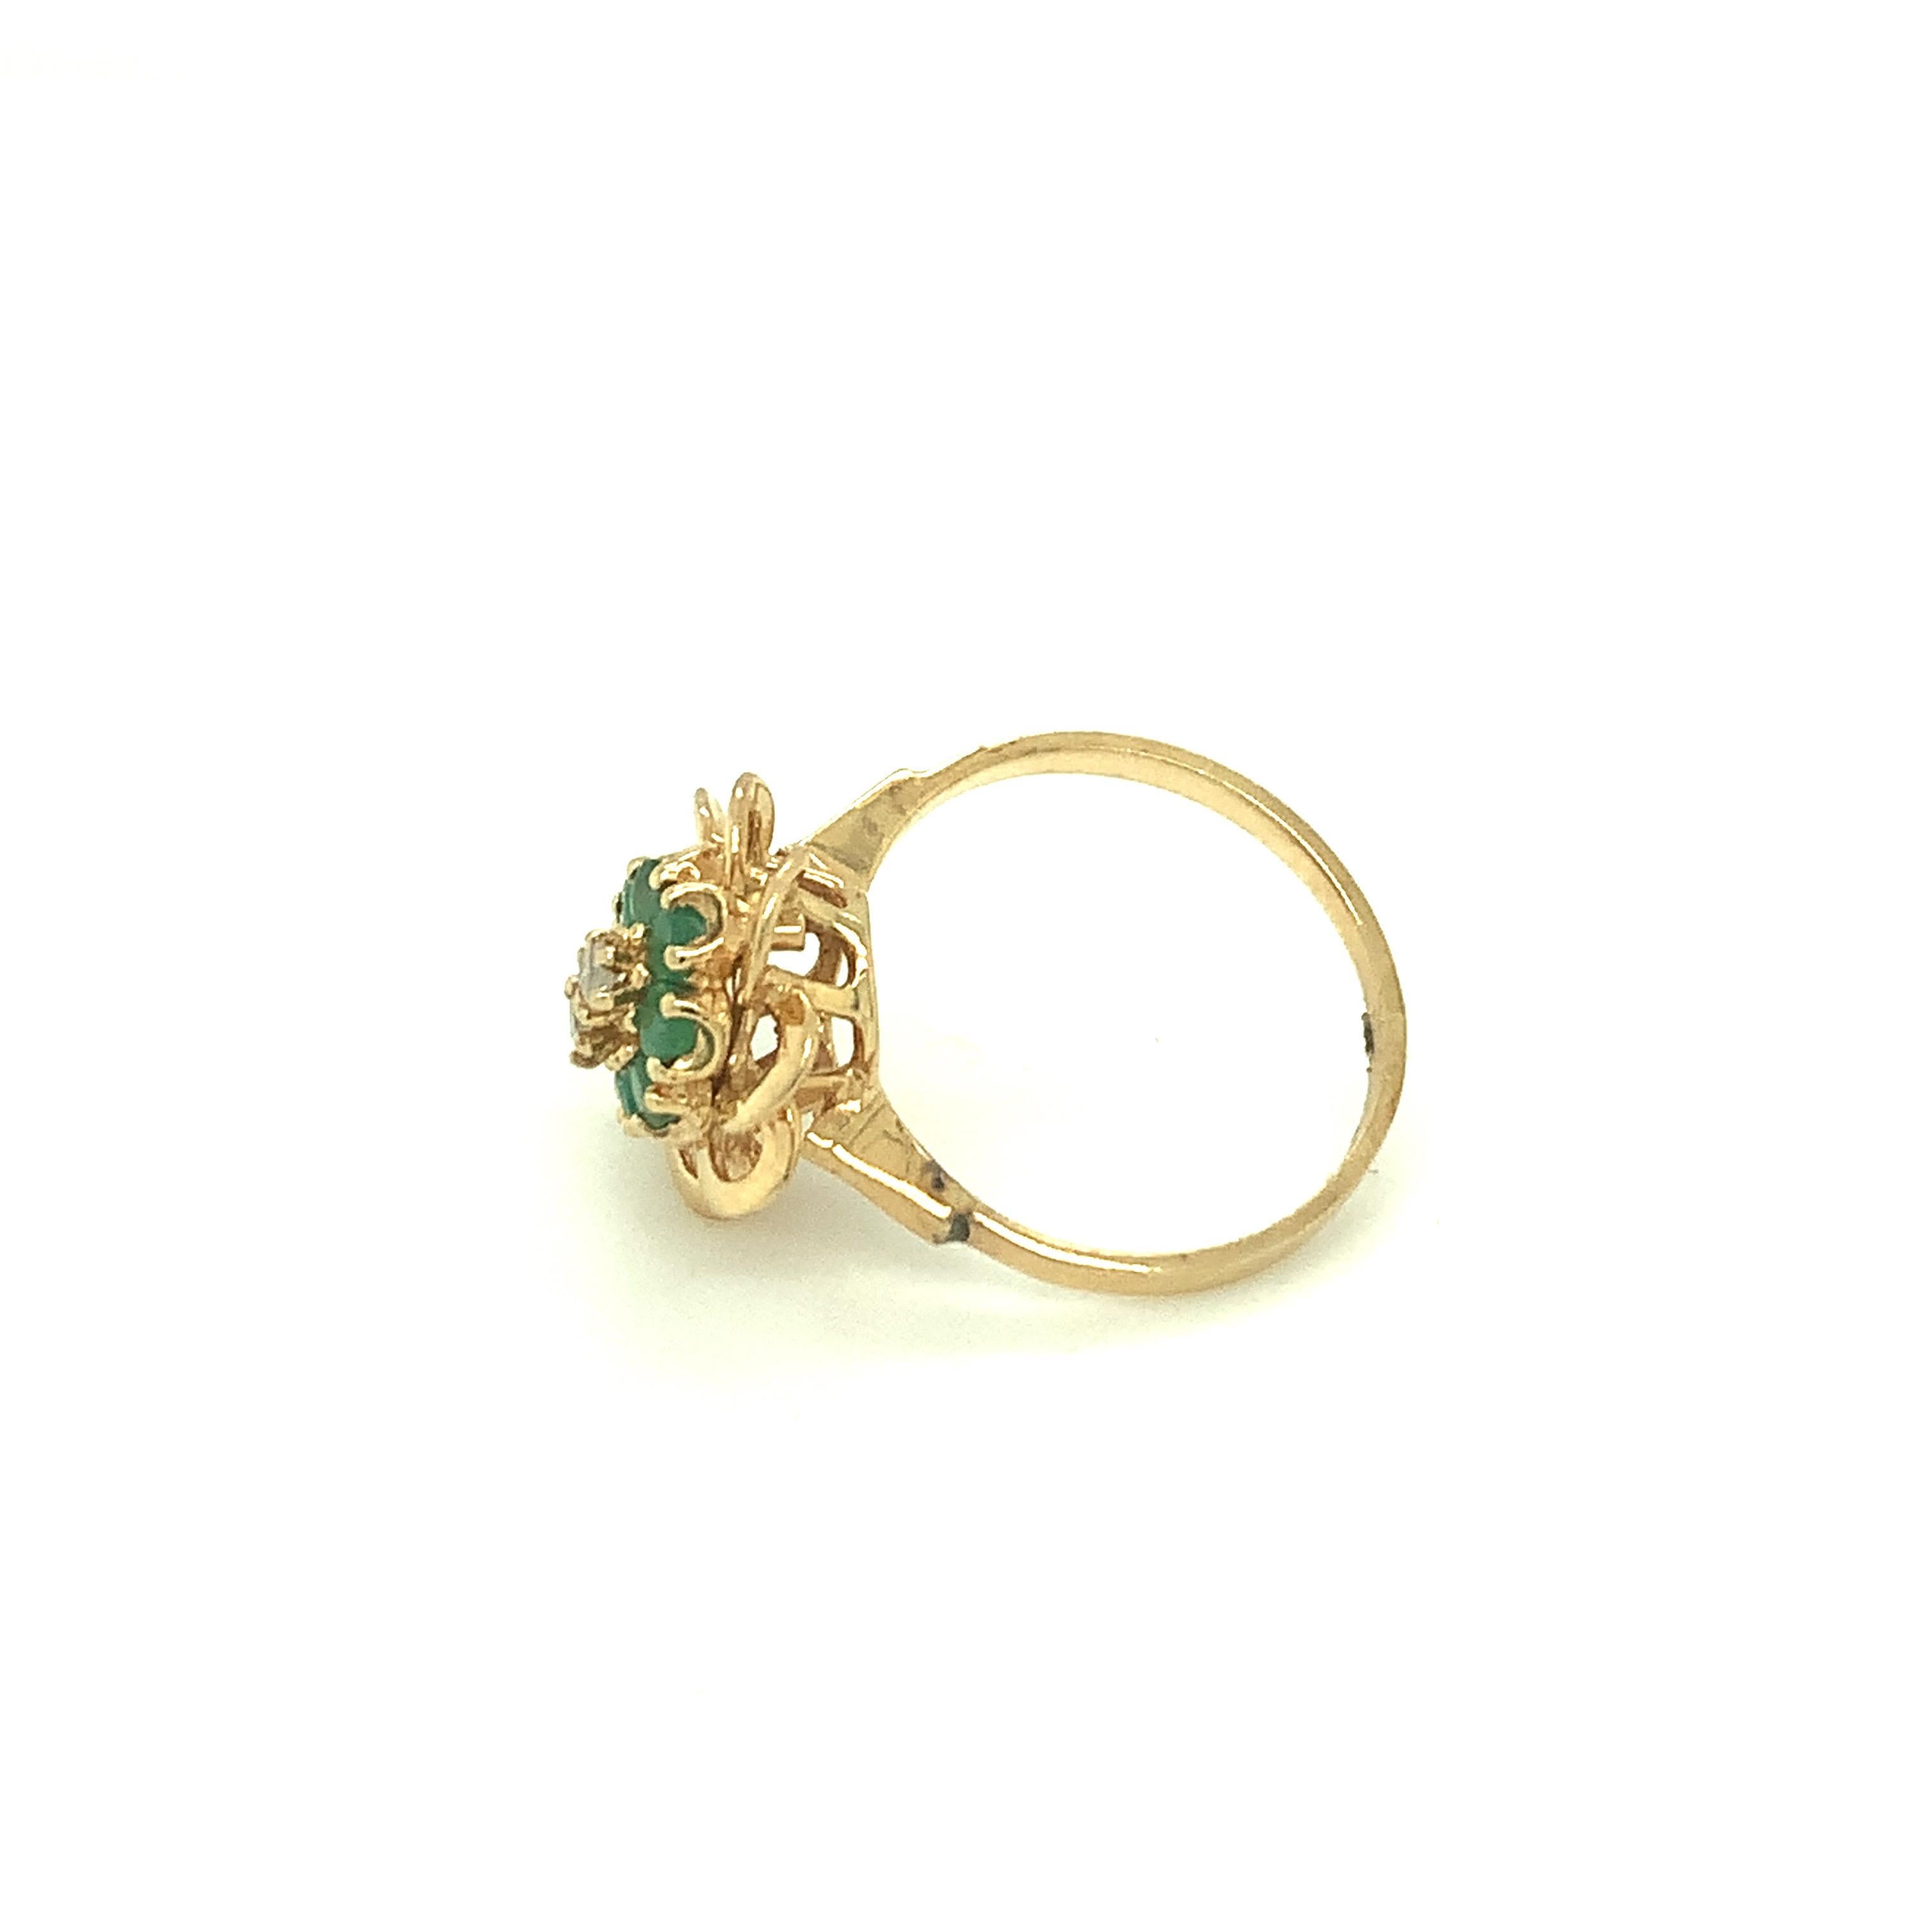 A classic beauty of yesteryear, this floral inspired ring has emerald with diamond in center set in 14K yellow gold.